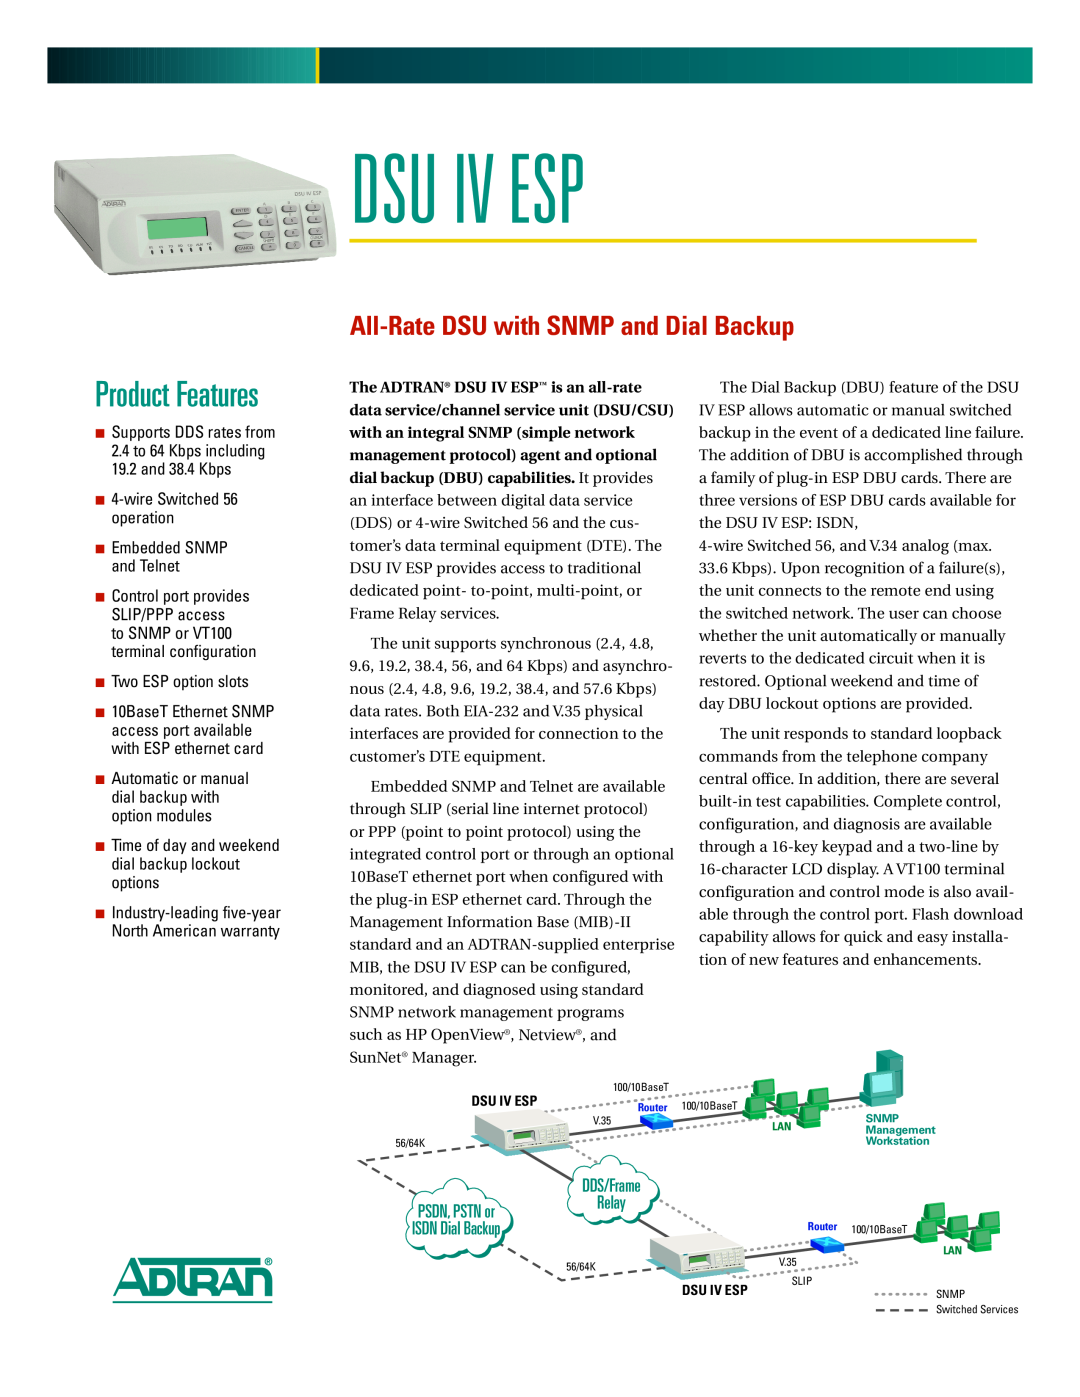 ADTRAN DSUIVESP warranty Dsu Iv Esp, Product Features, All-Rate DSU with SNMP and Dial Backup, wire Switched 56 operation 